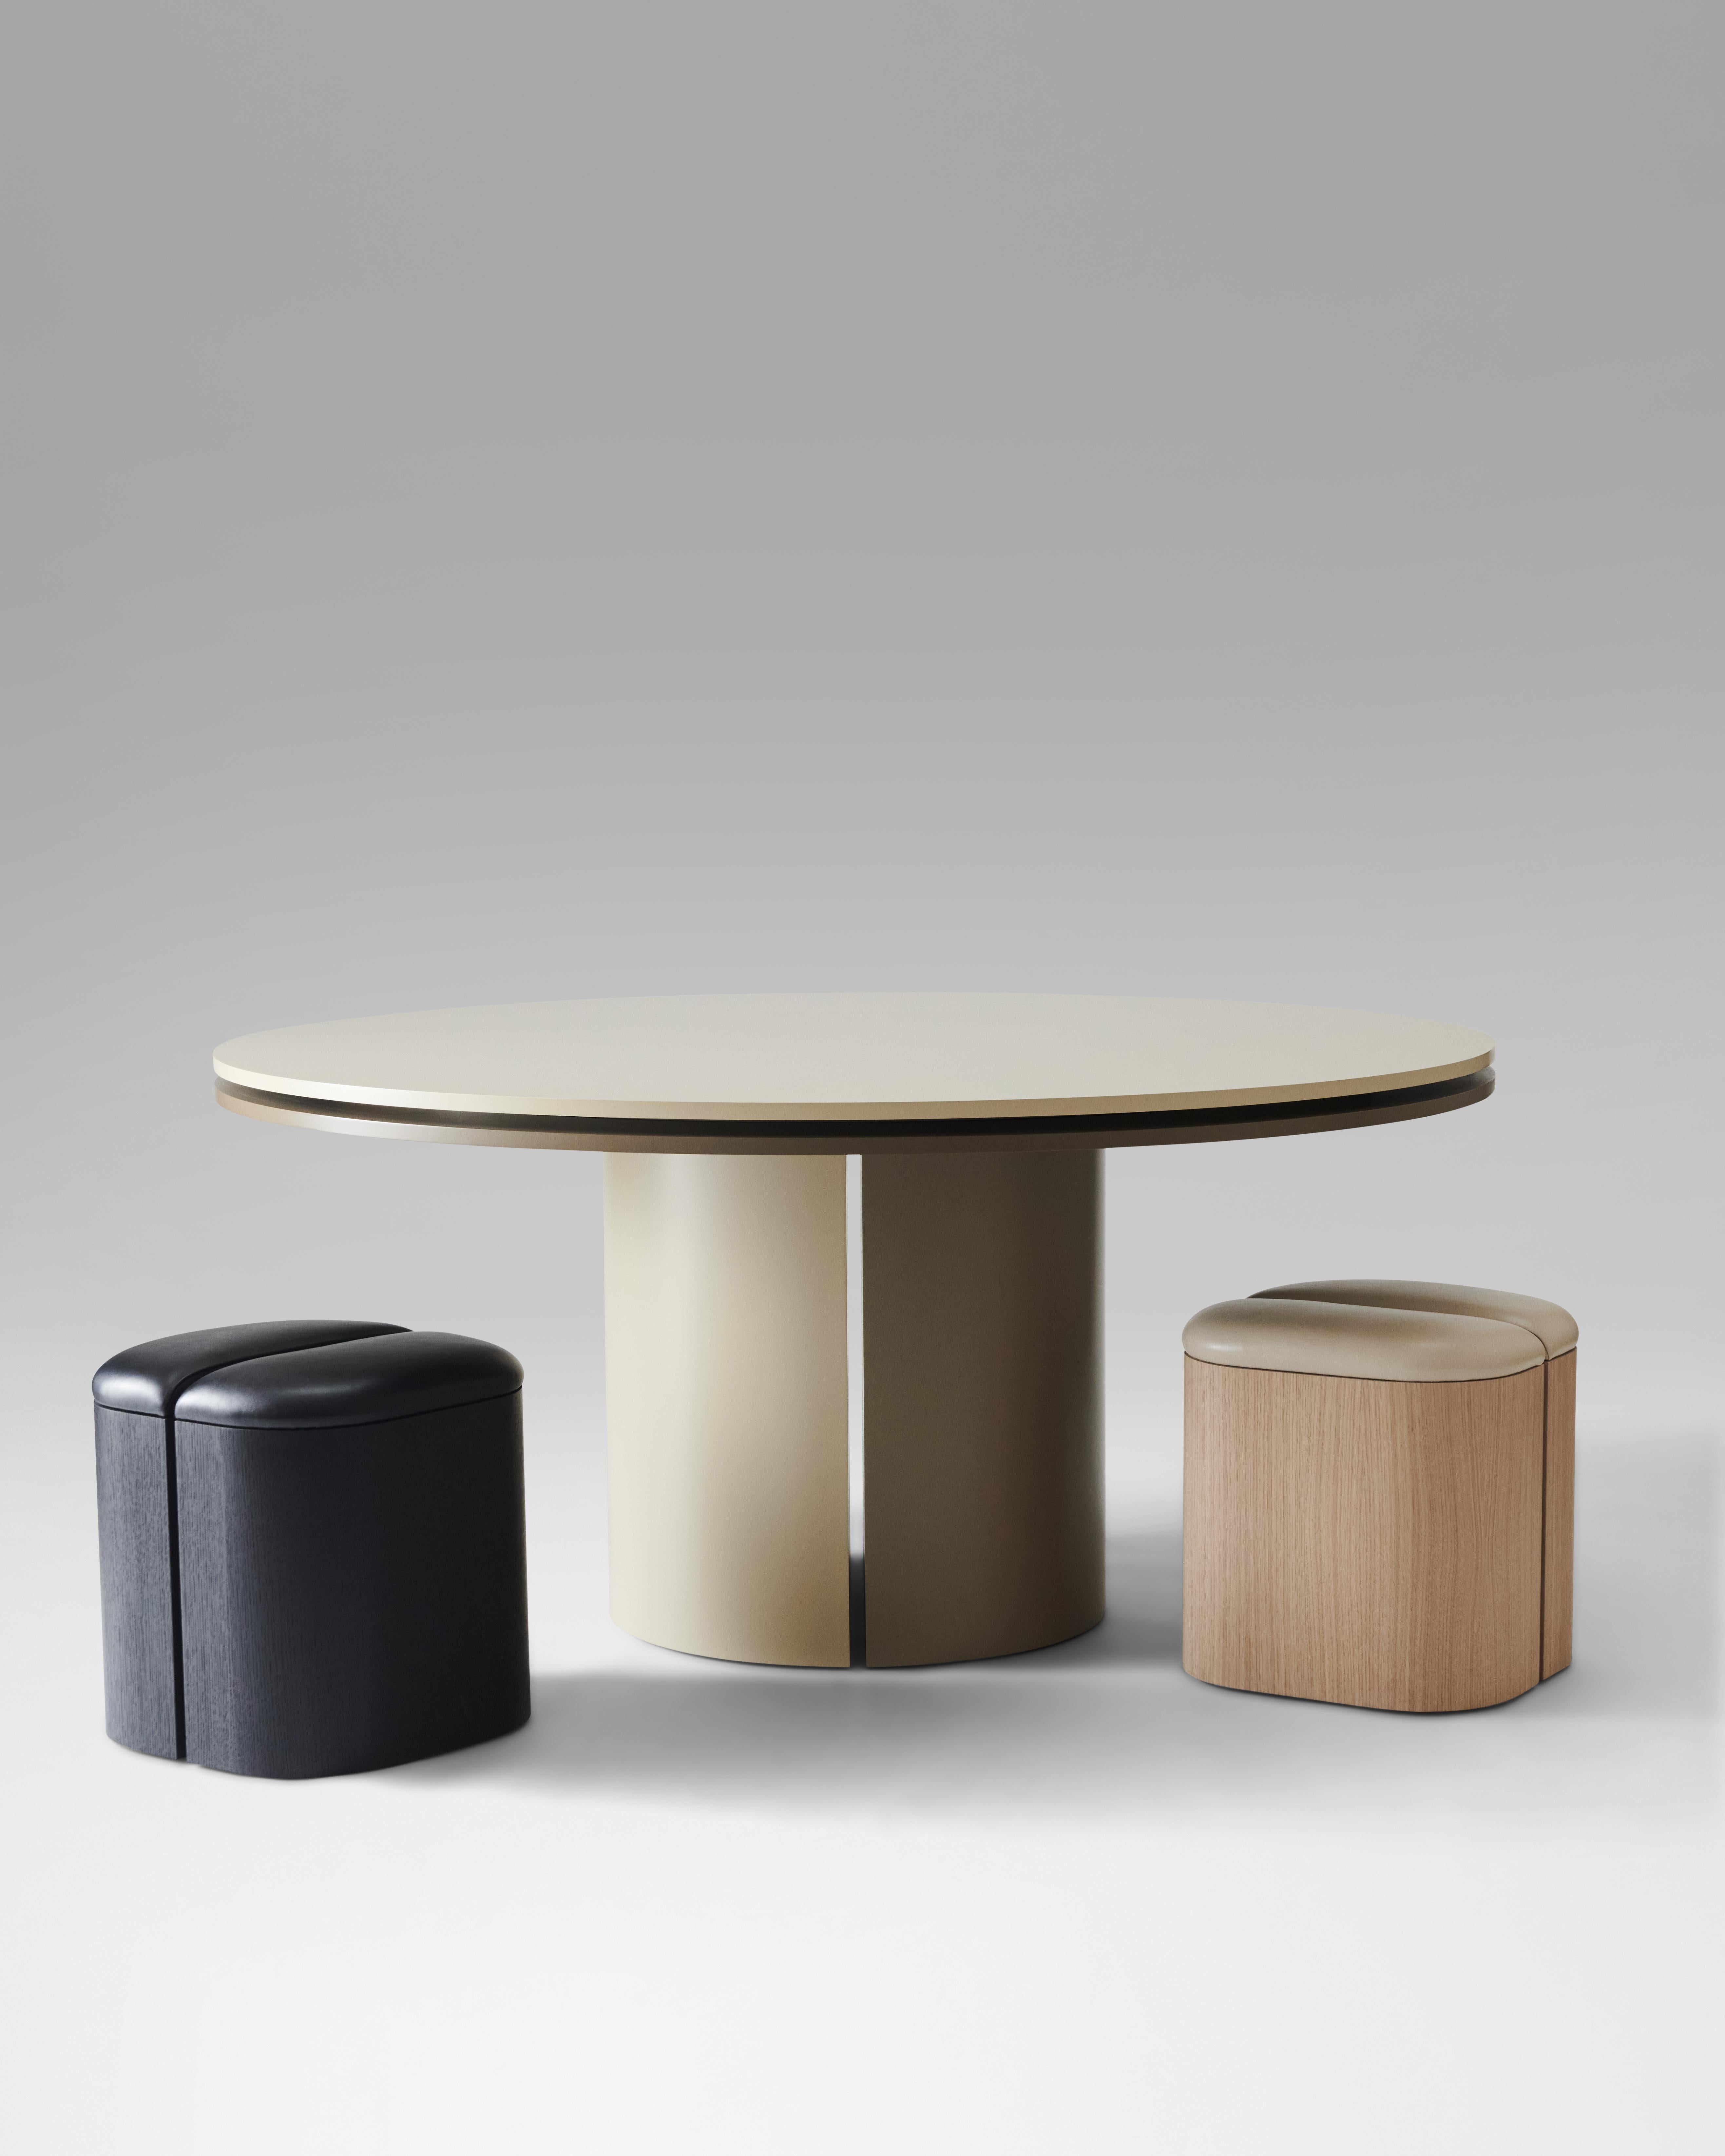 LUZ White Oak Pedestal Modern Dining Table by Estudio Persona In New Condition For Sale In Los Angeles, CA